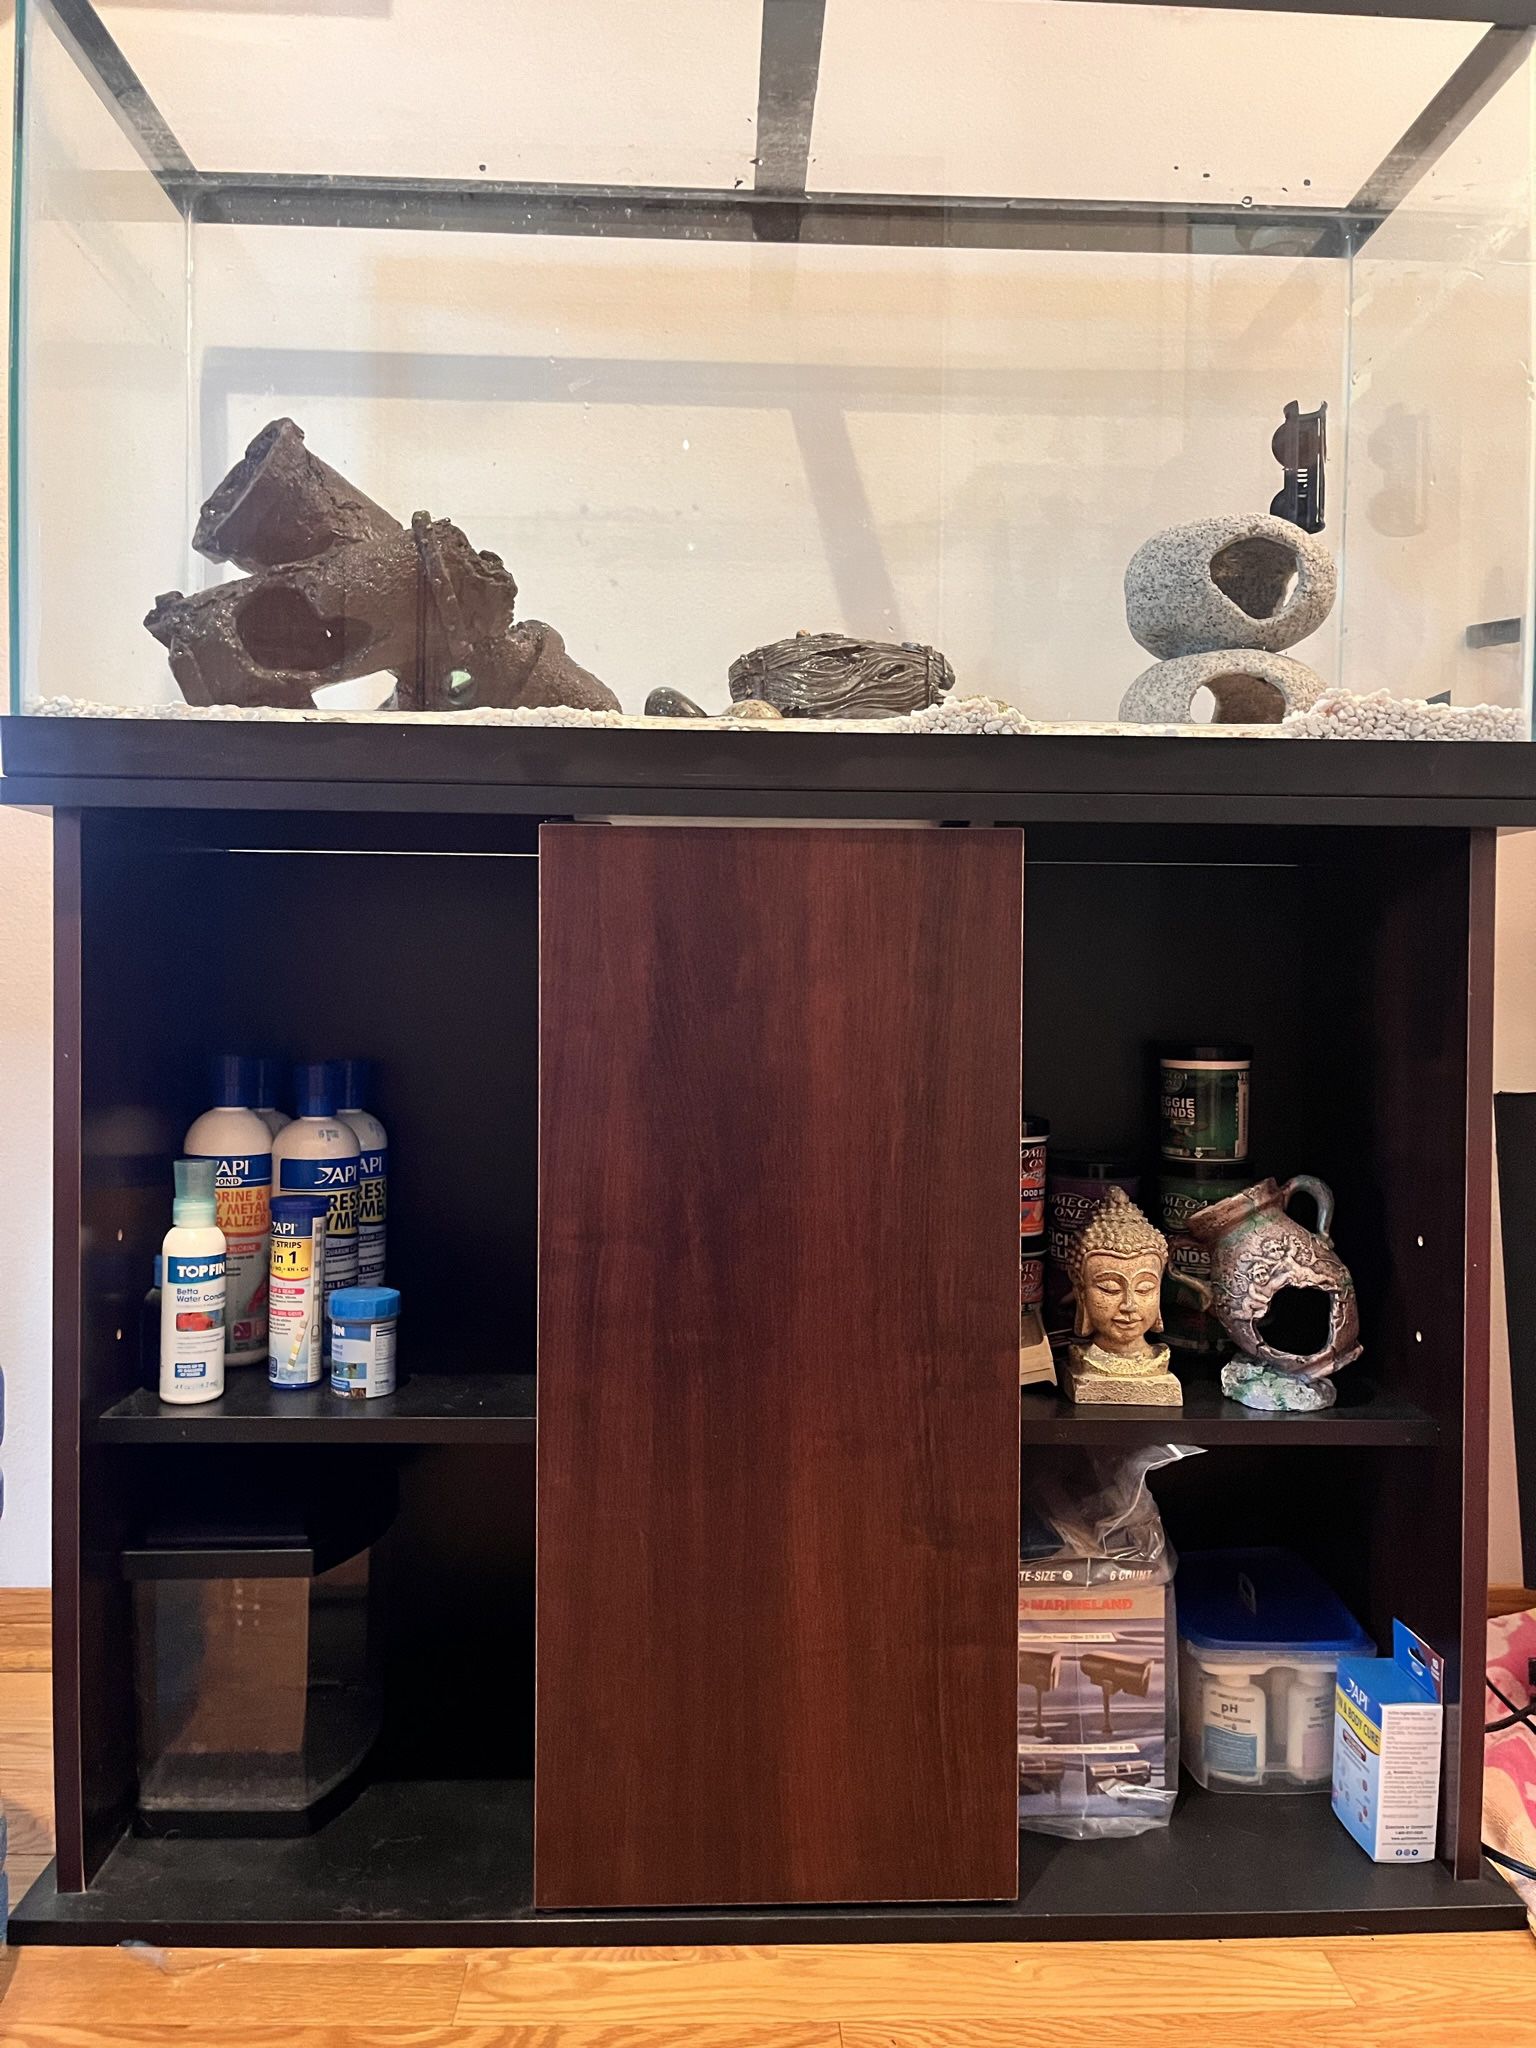 40 Gallon Fish Tank With Accessories For Sale